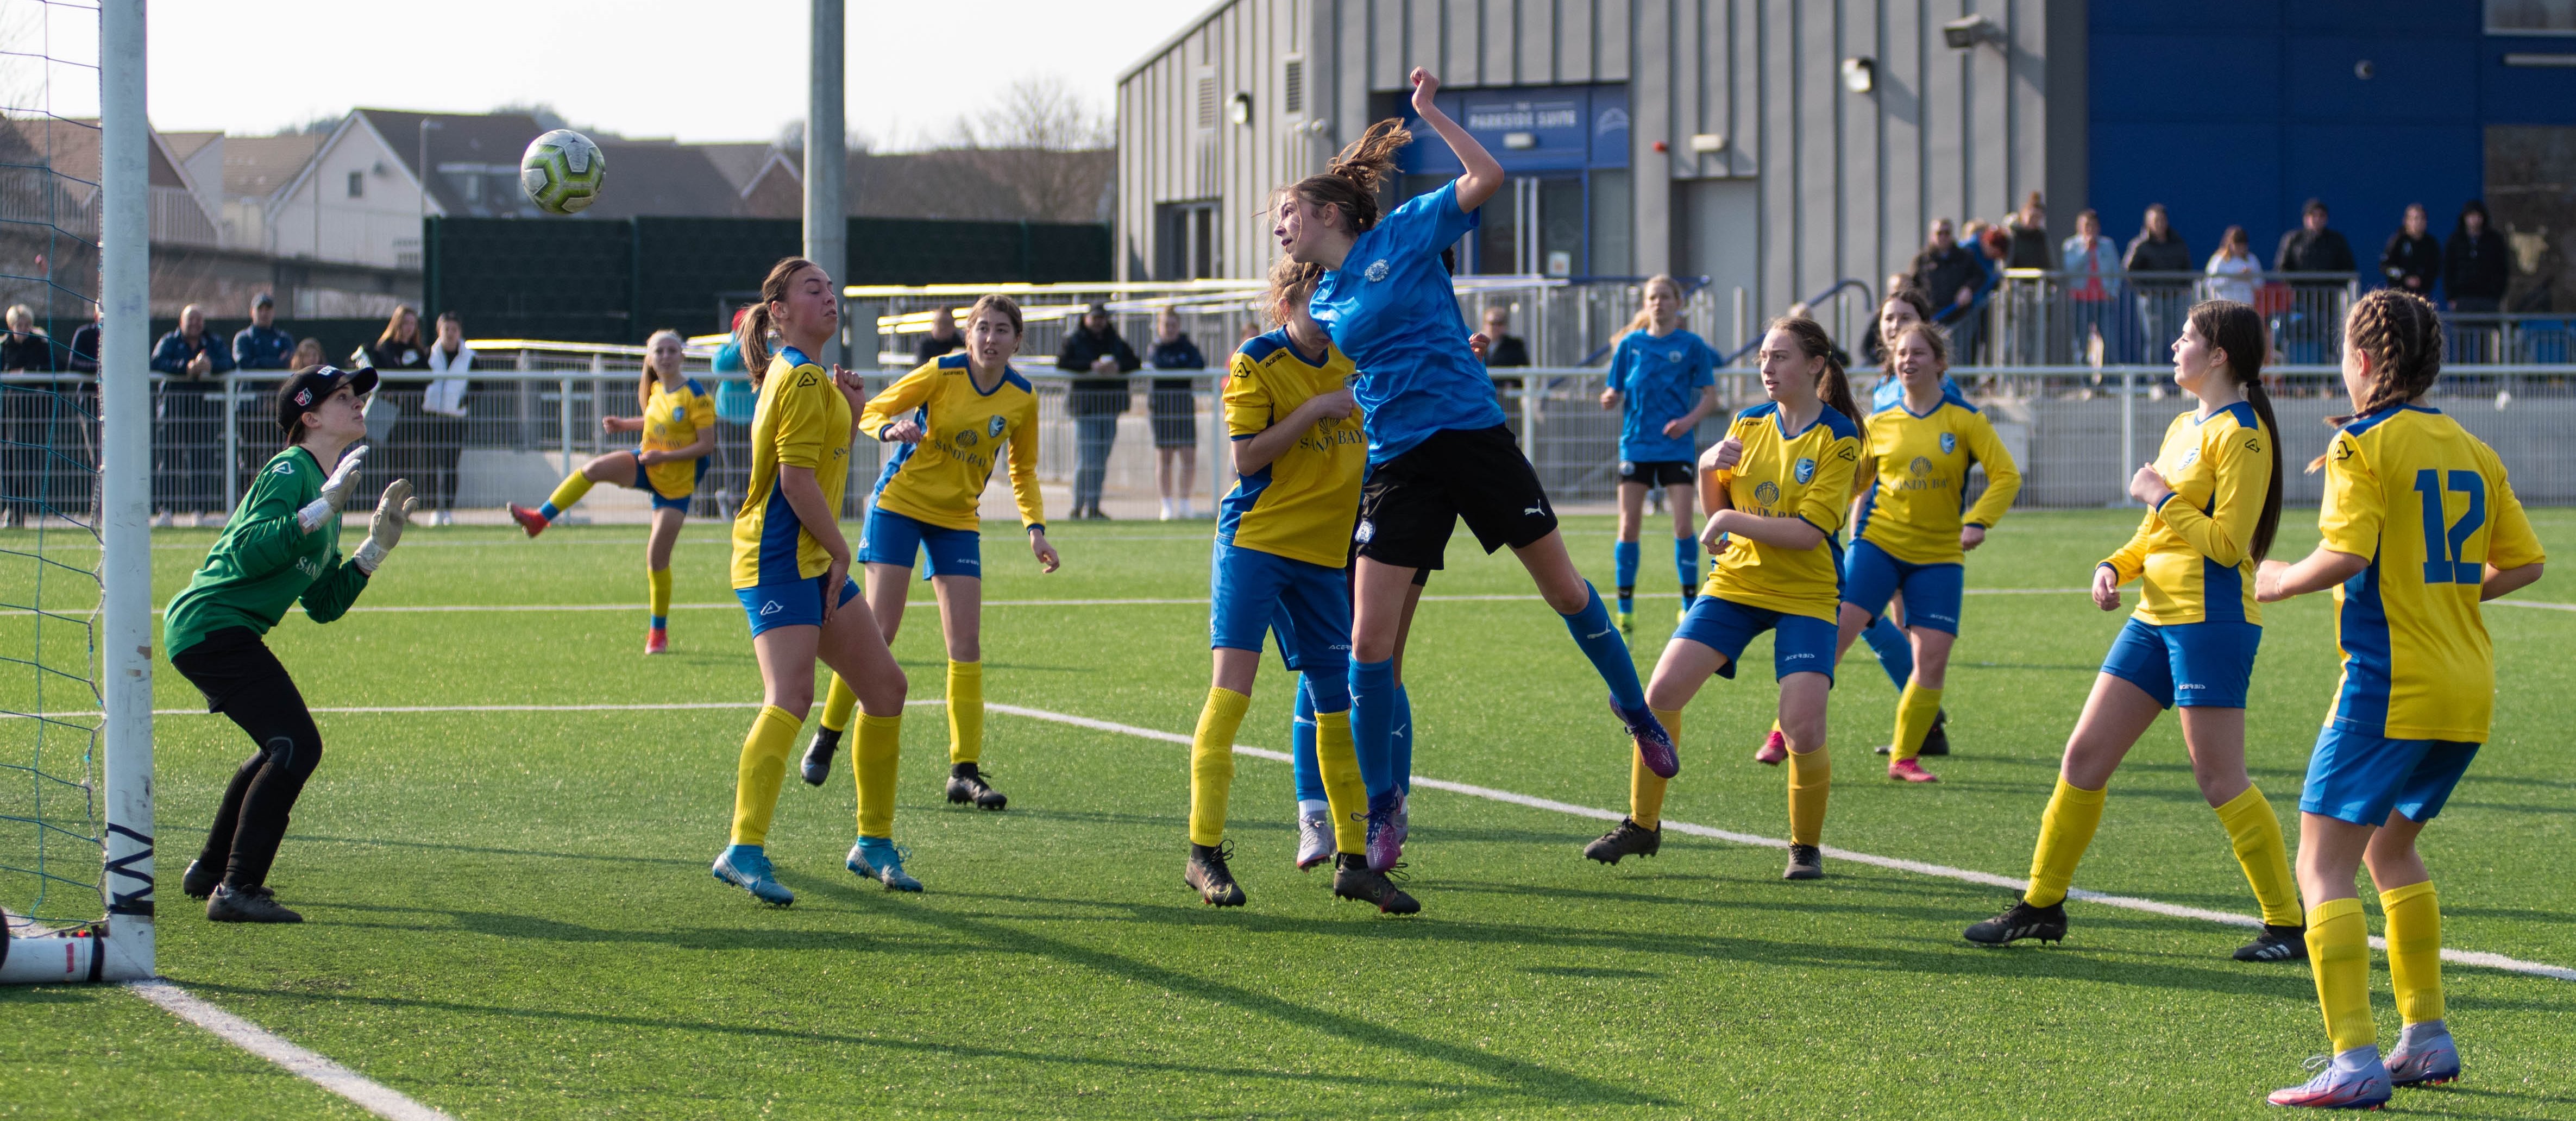 Billericay Town 4-3 Canvey Island Under 15s (Blues) (Under 16s Girls Cup Final)